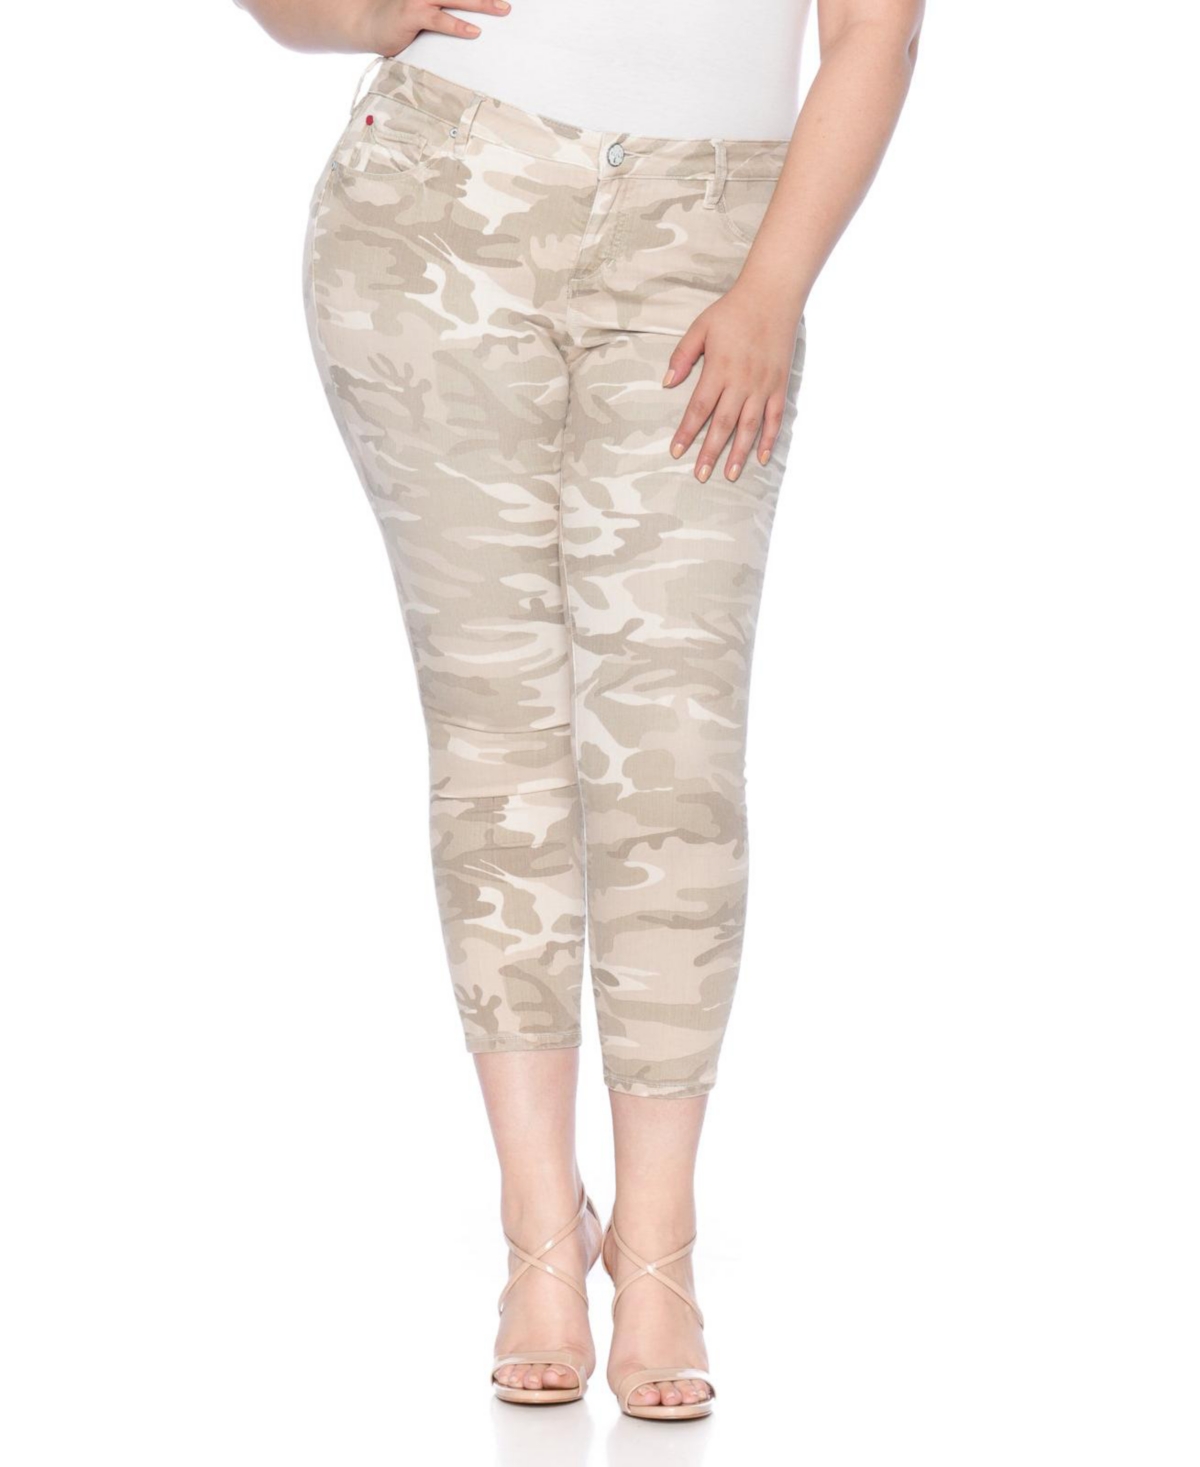 Plus Size Mid Rise Ankle Skinny Jeans - Cloud camo